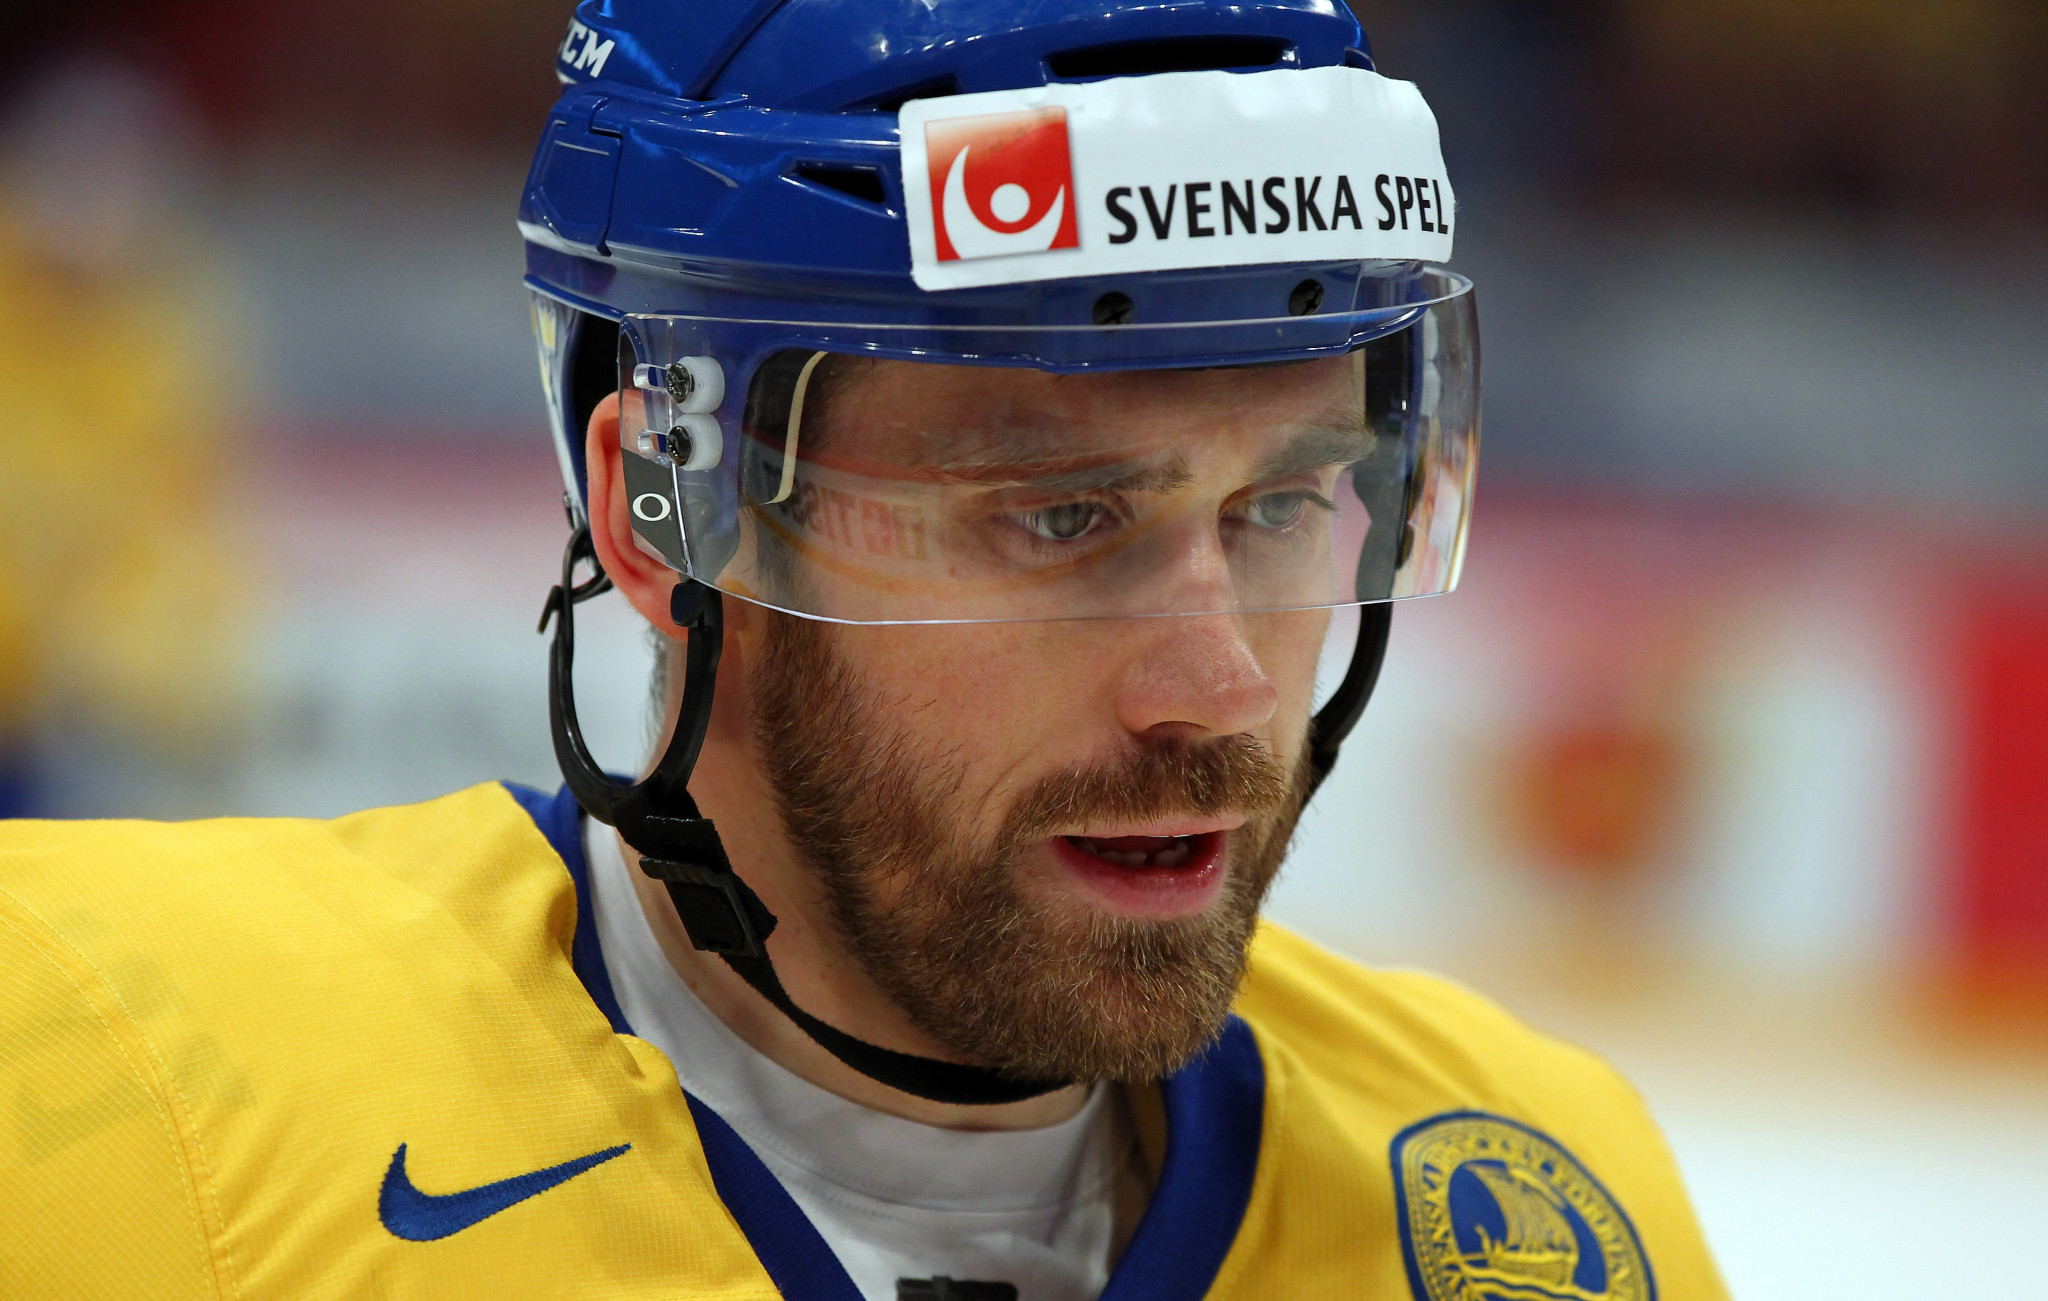 Sweden's Zetterberg retires from ice hockey due to back injury